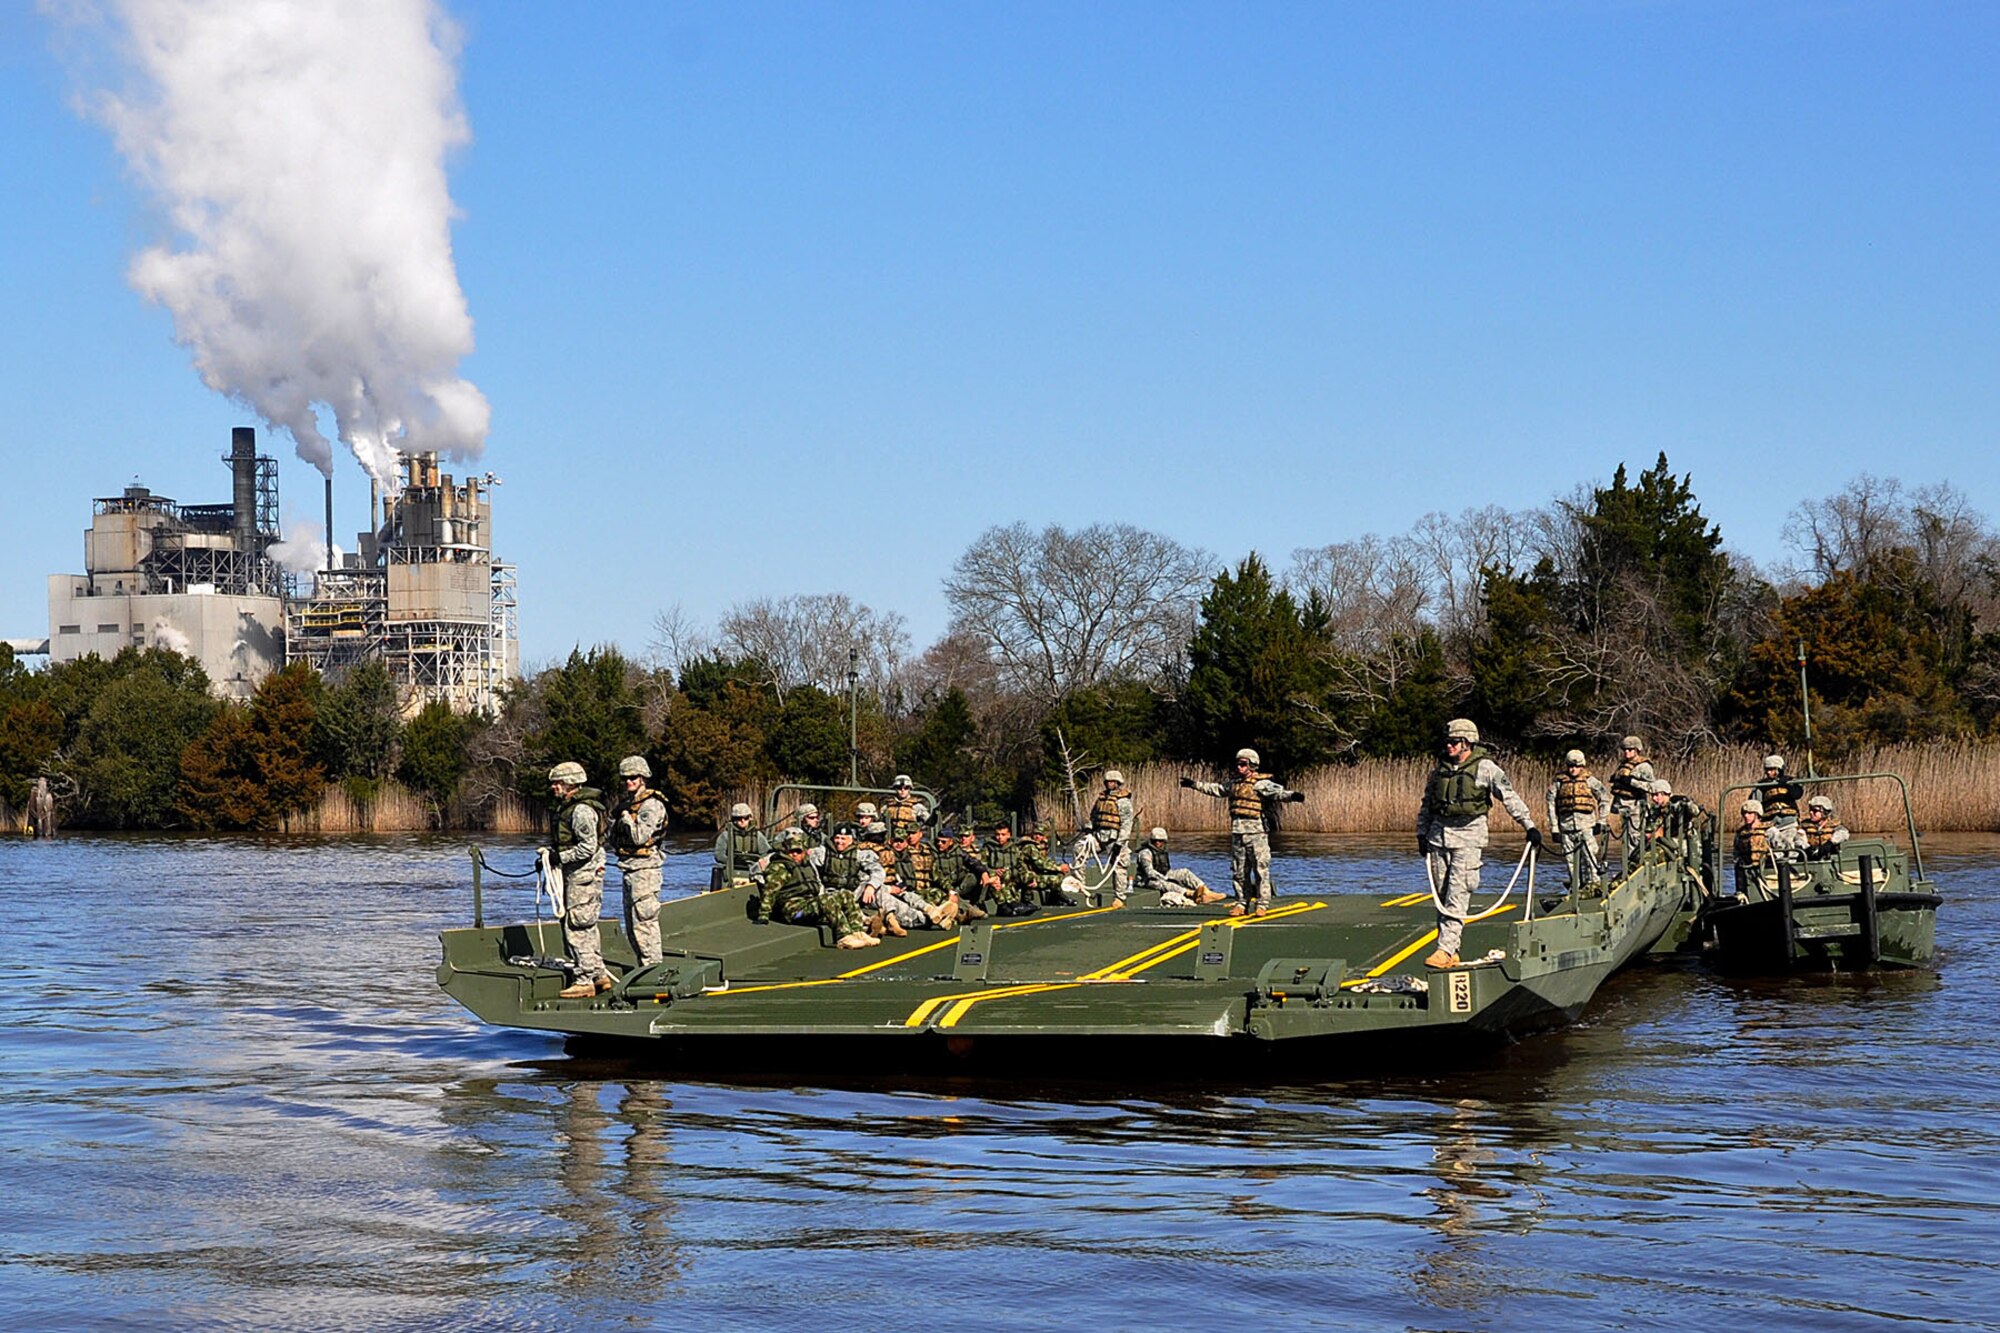 U.S. Army Engineers with the South Carolina Army National Guard’s 125th Multi-Role Bridge Company (MRBC) conduct simulated ferry operations March 7, 2015 during Vigilant Guard 15. This exercise is designed to simulate a joint emergency response following the impact of a category four hurricane.  Hundreds of Georgia National Guardsmen are participating in Vigilant Guard 15 along with more than 2,000 Guardsmen from North and South Carolina during 3 to12 March. Vigilant Guard is a series of federally-funded disaster-response drills conducted by National Guard units working with federal, state and local emergency management agencies and first responders. (U.S. Army National Guard photo by Capt. William Carraway/Released)